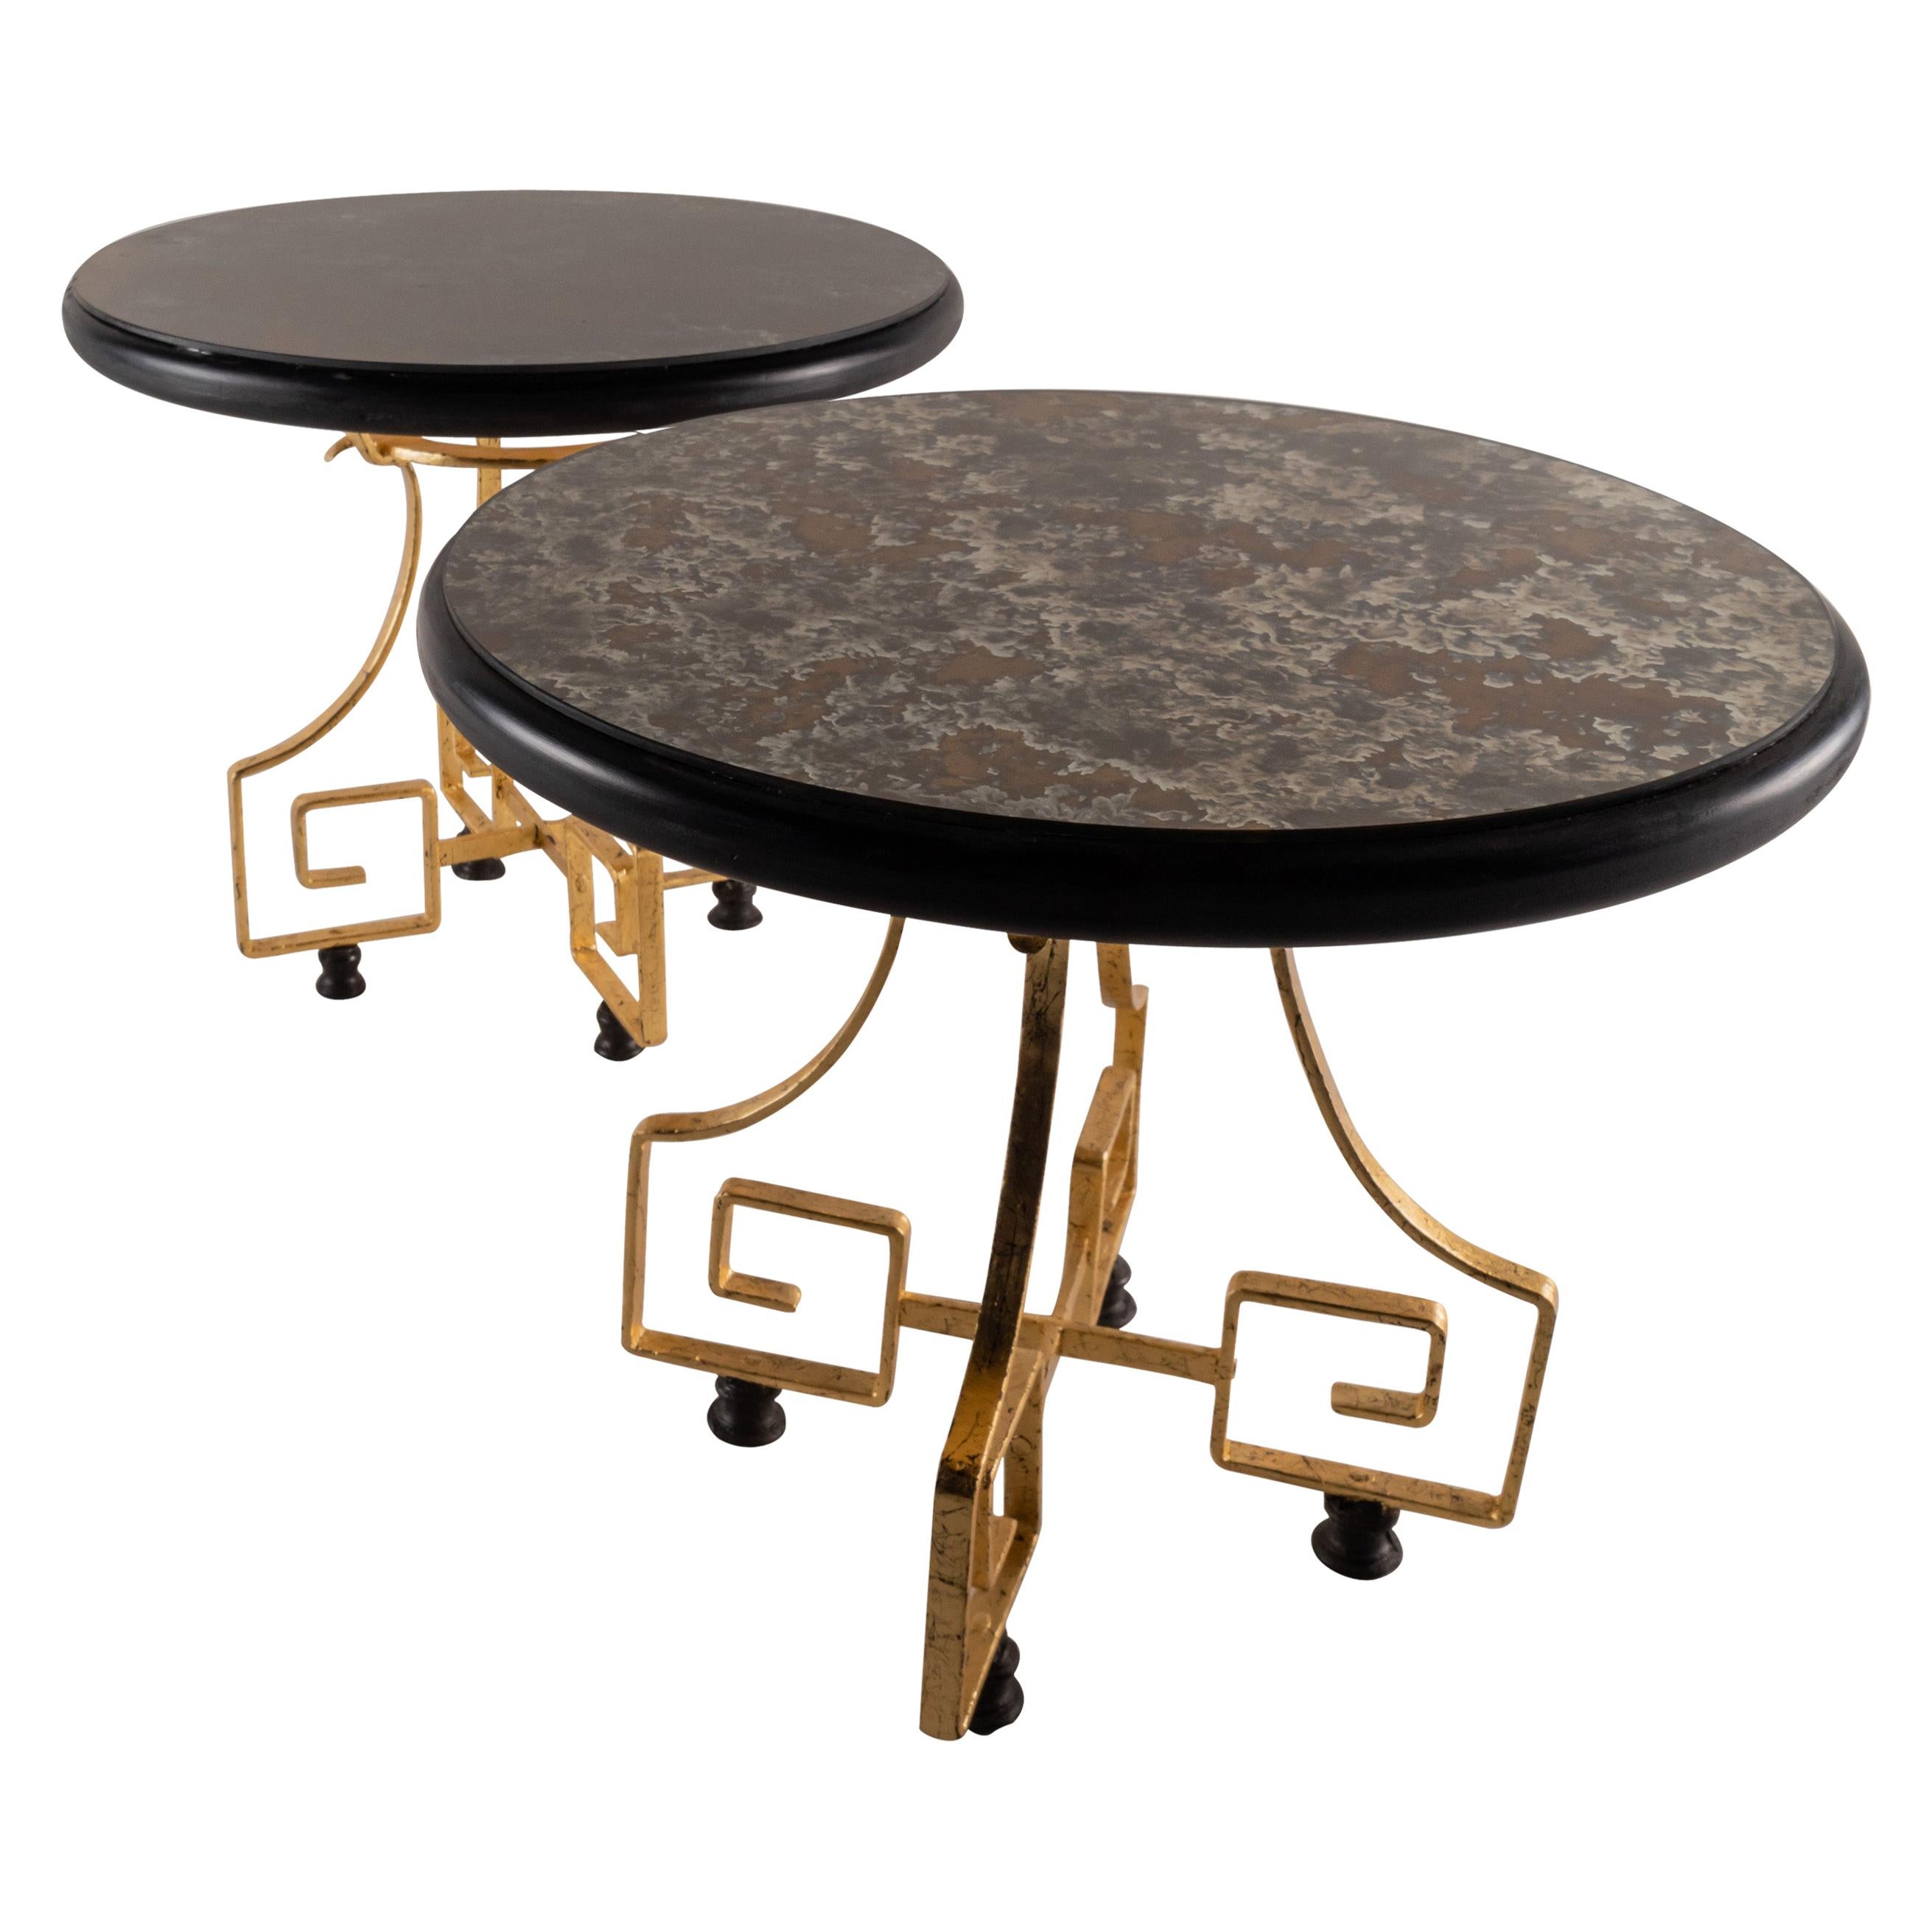 Beautiful Pair of Wrought Iron and Glass Side Tables Attributed to Arturo Pani